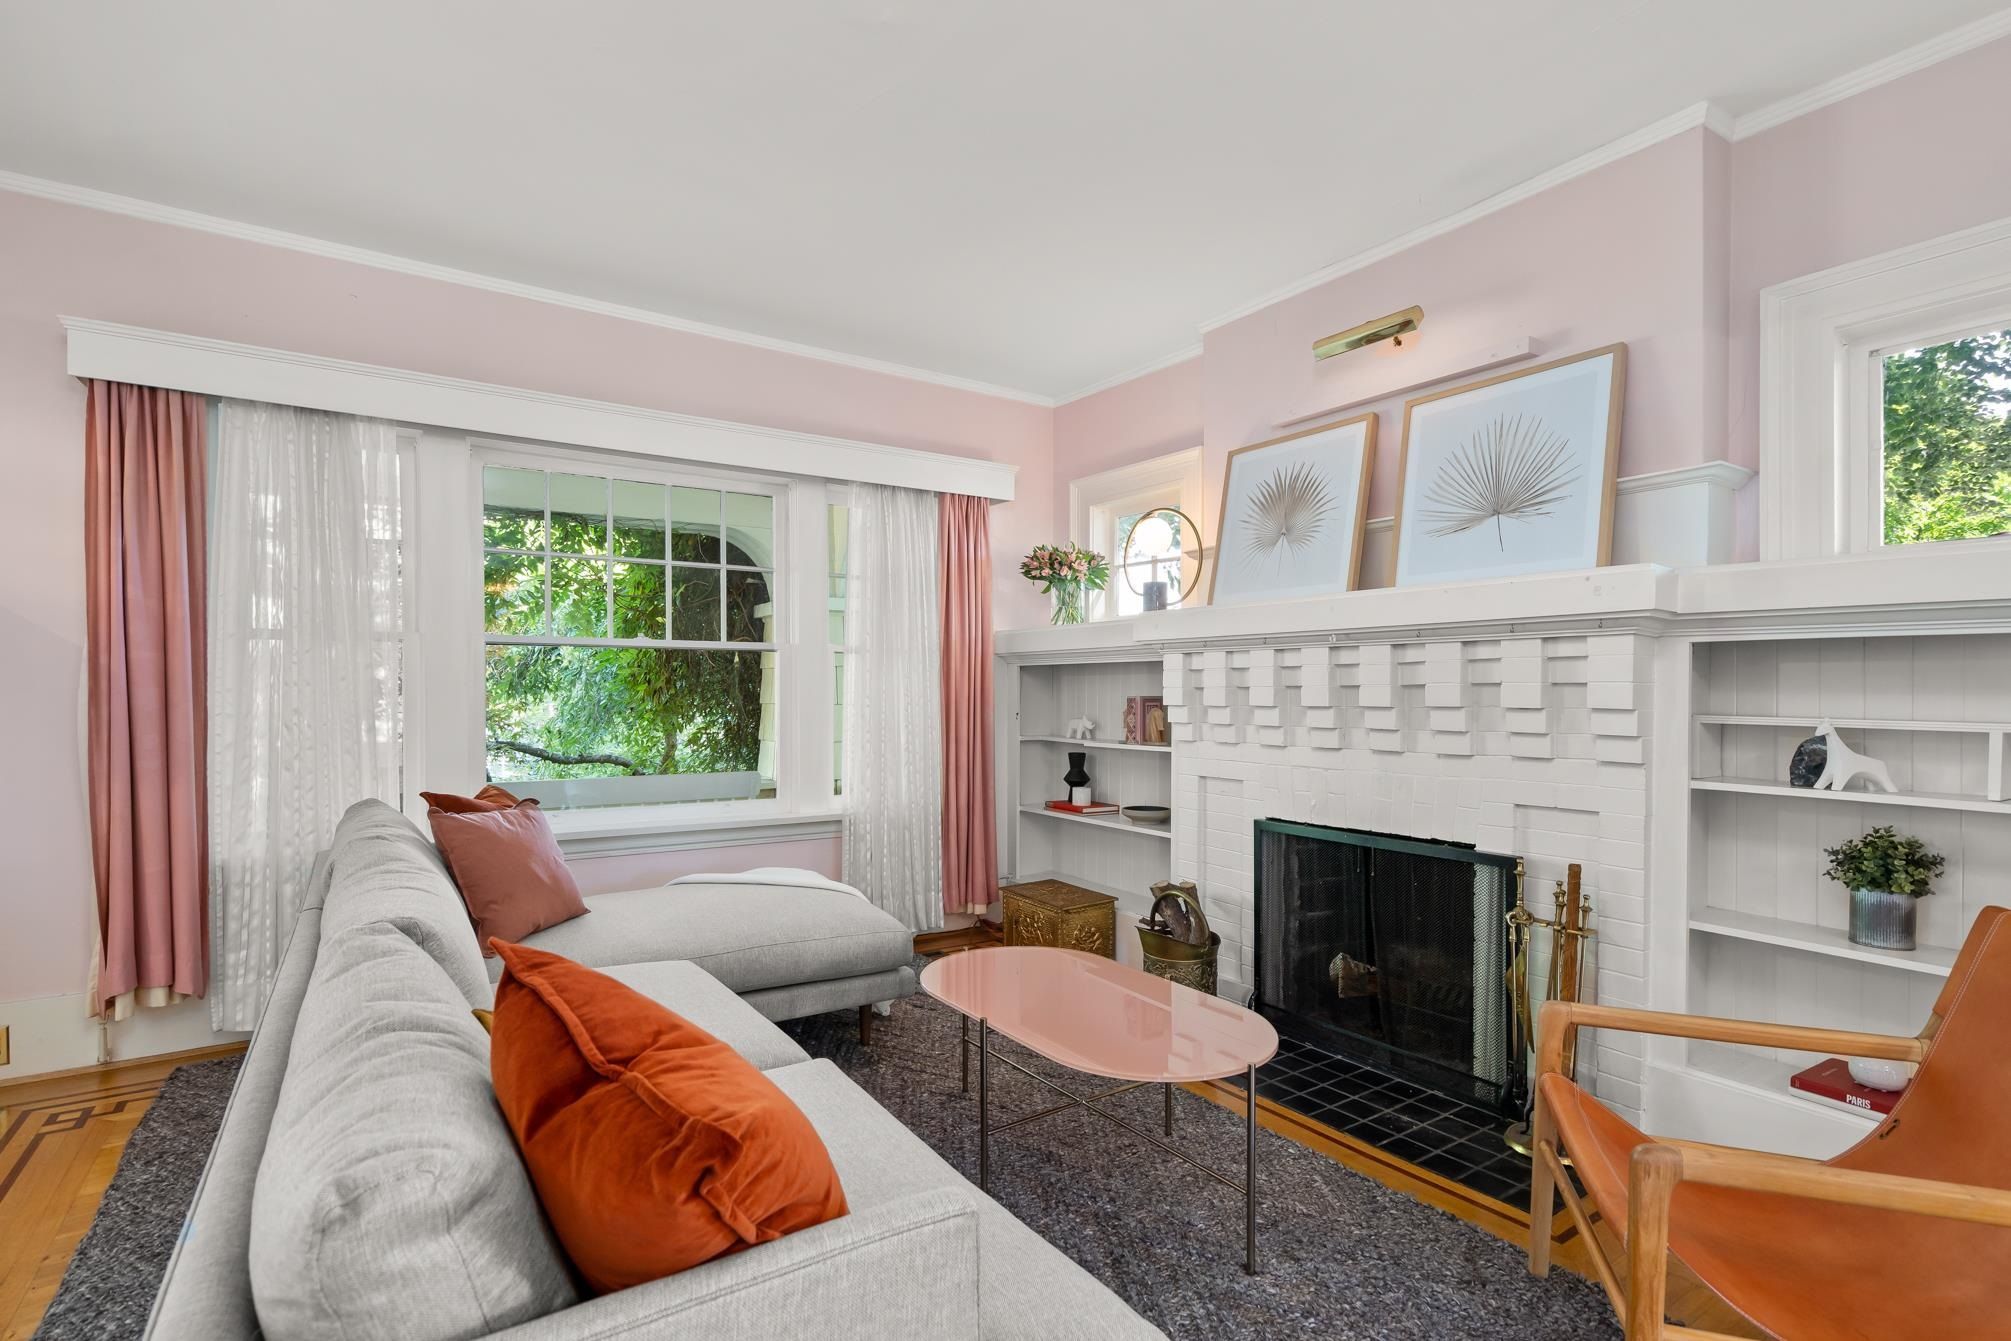 Main Photo: 2506 W 12TH Avenue in Vancouver: Kitsilano House for sale (Vancouver West)  : MLS®# R2614455